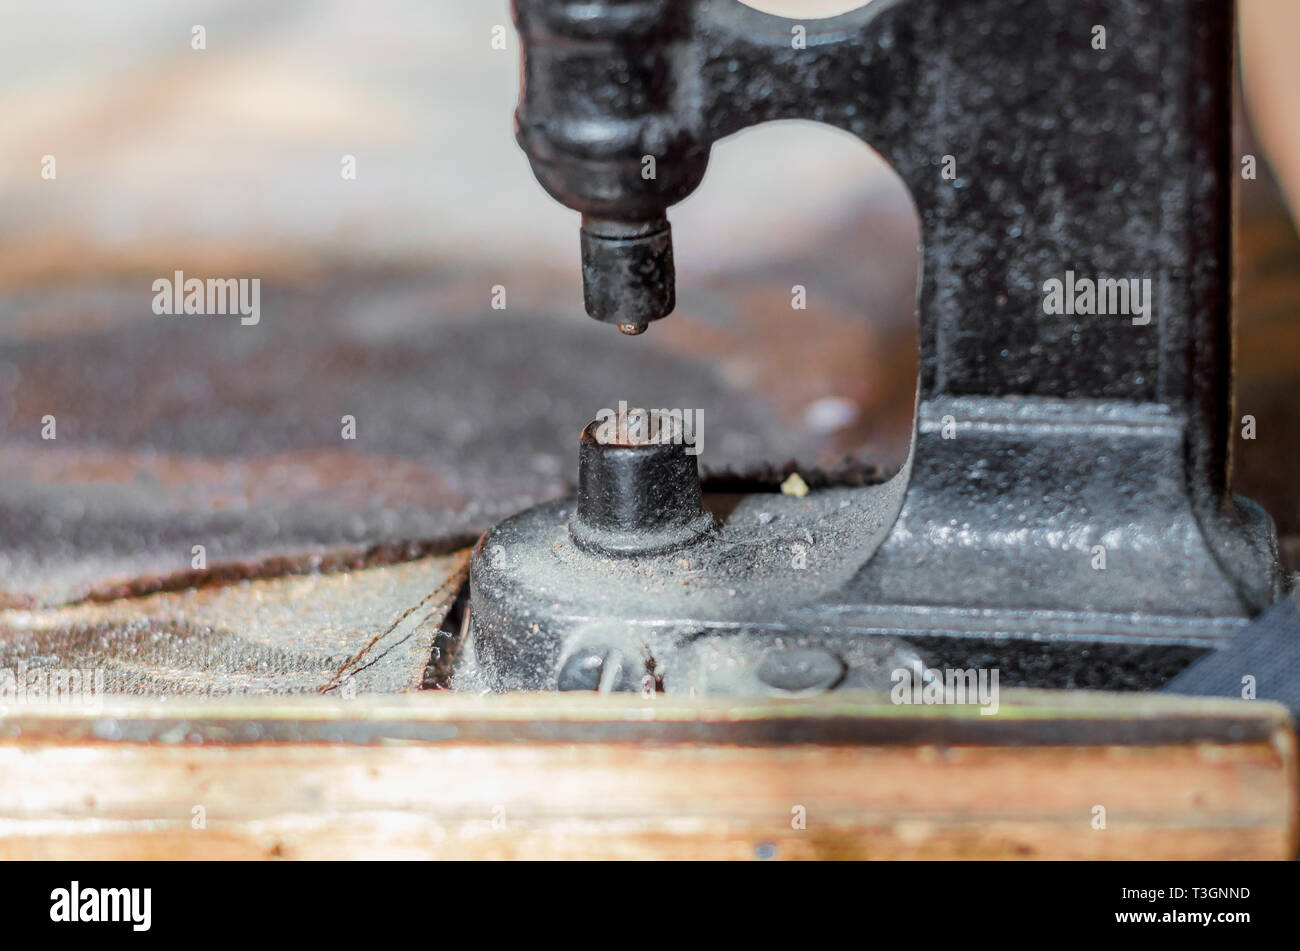 Vintage hand-press for setting rivets on clothes. The shoemaker's workshop. Stock Photo